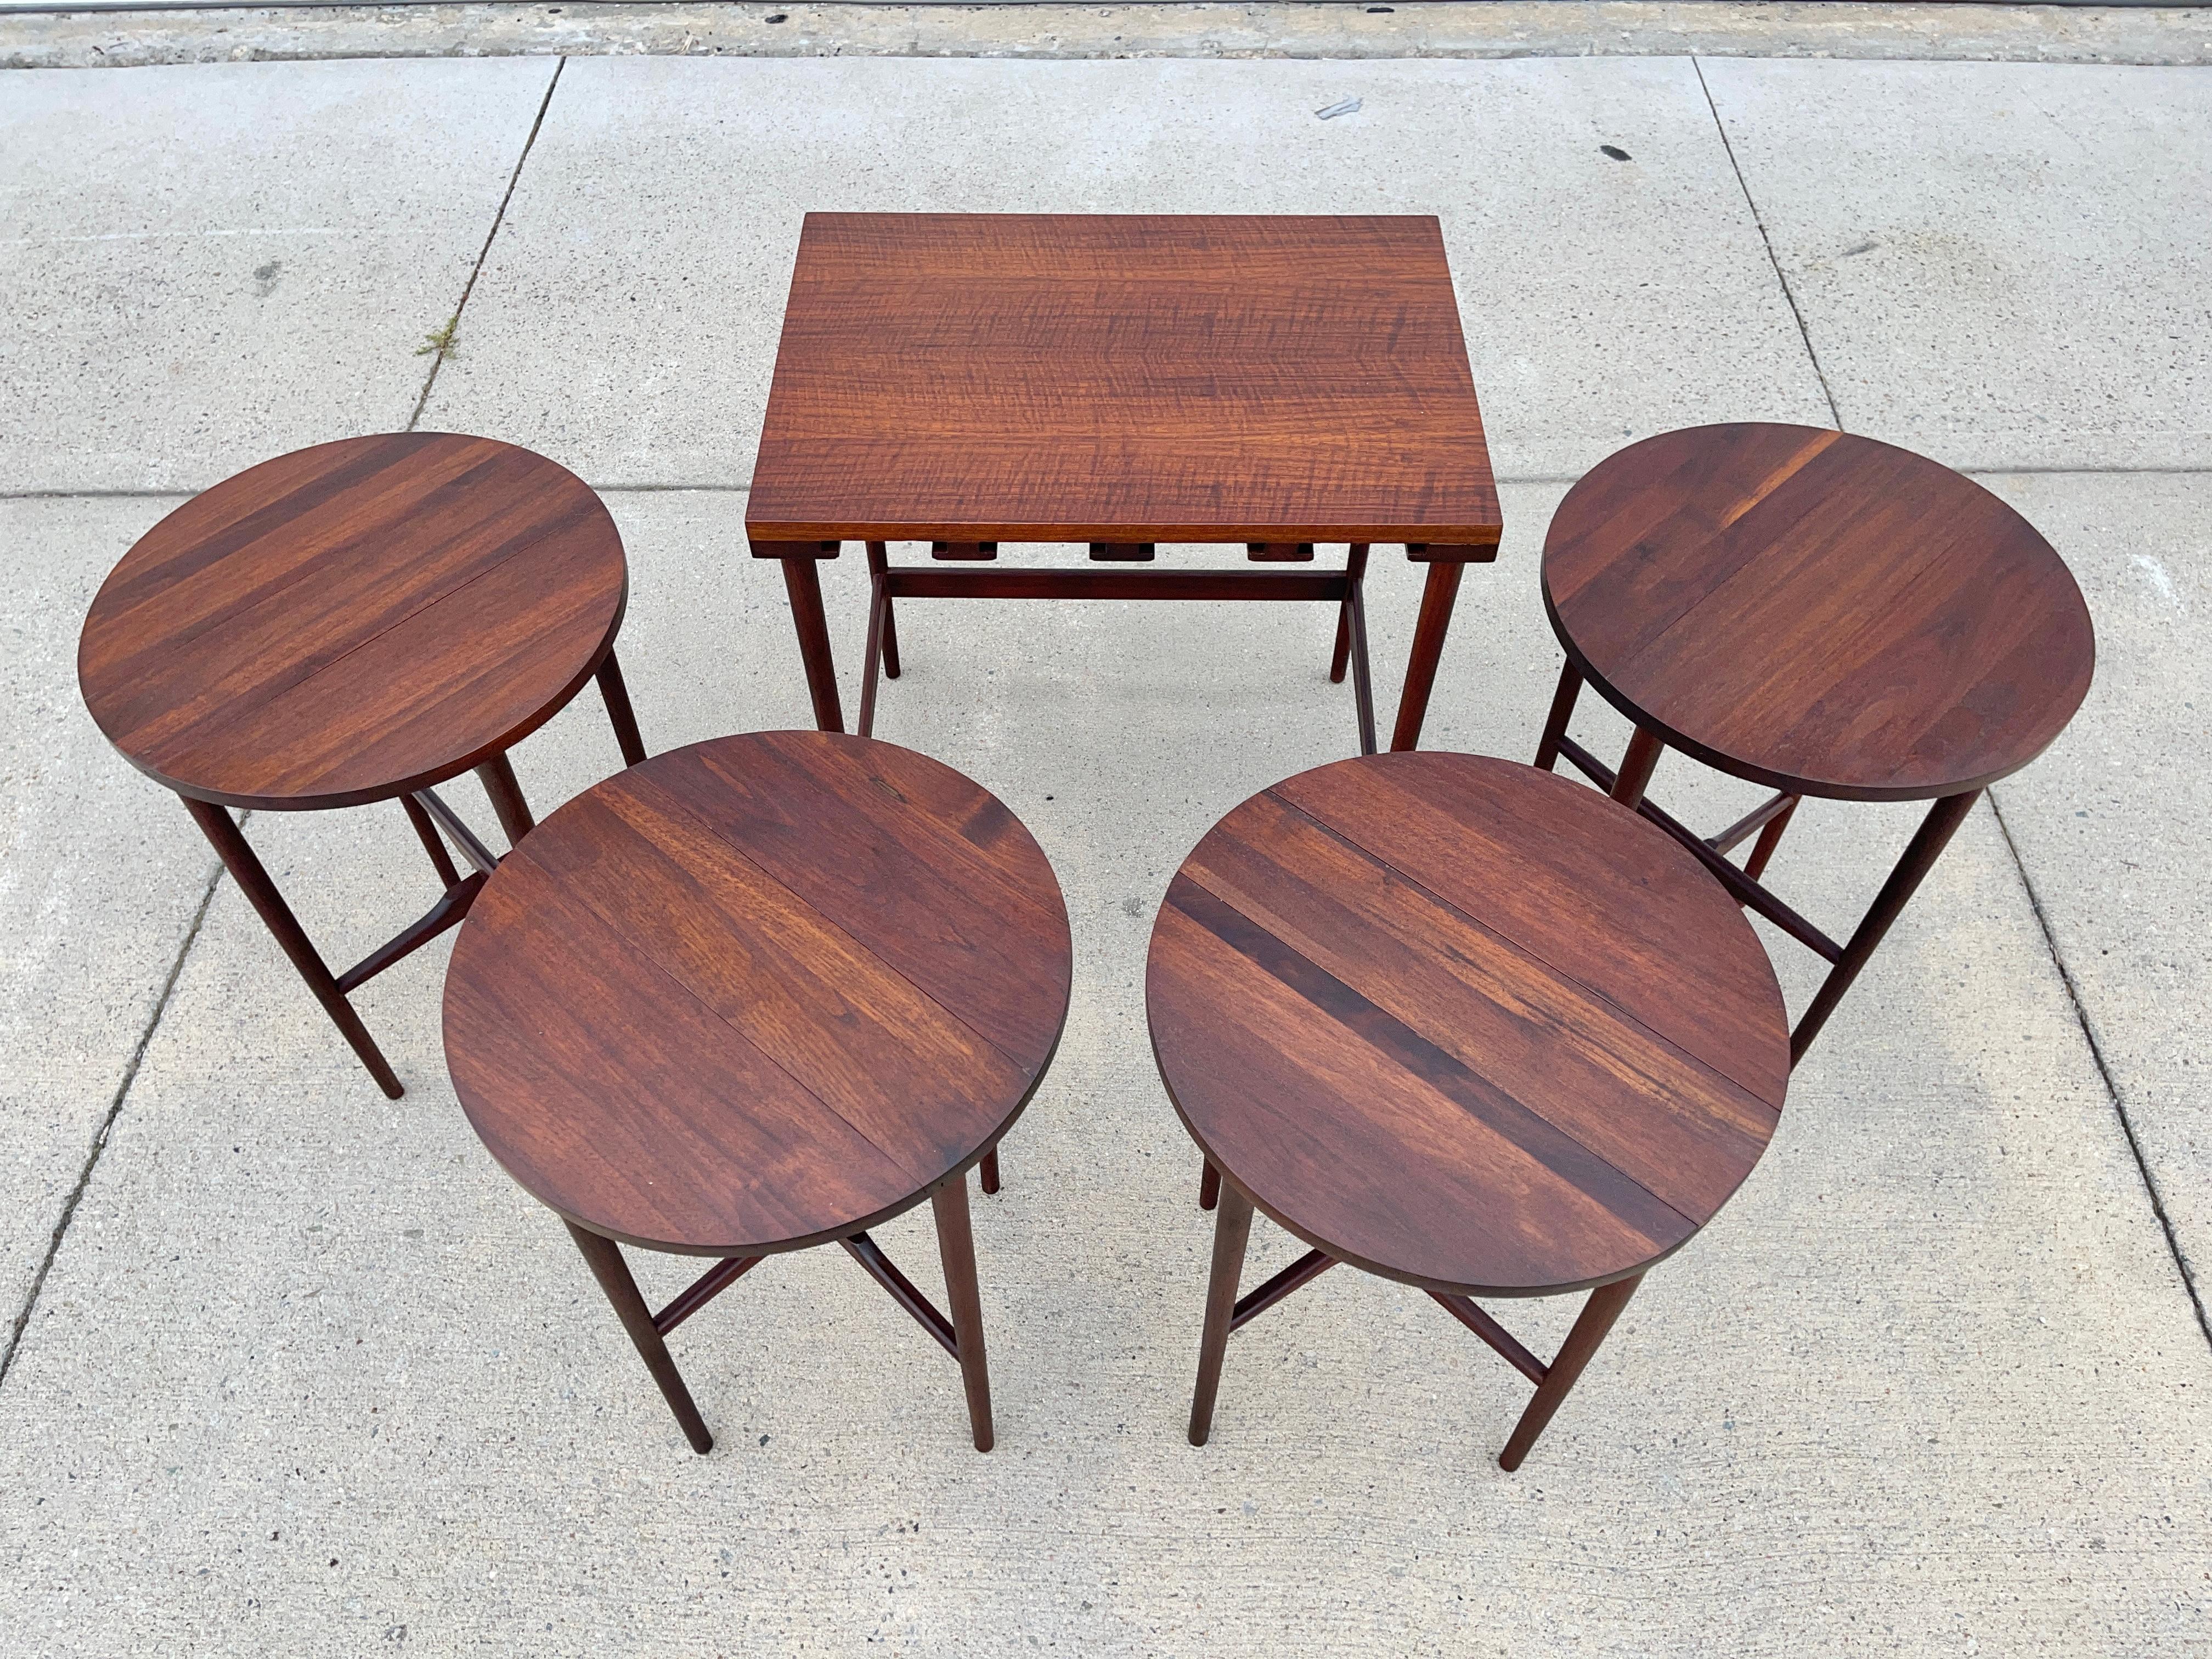 Bertha Schaefer for M. Singer & Sons Walnut Serving Tables In Good Condition For Sale In Hanover, MA